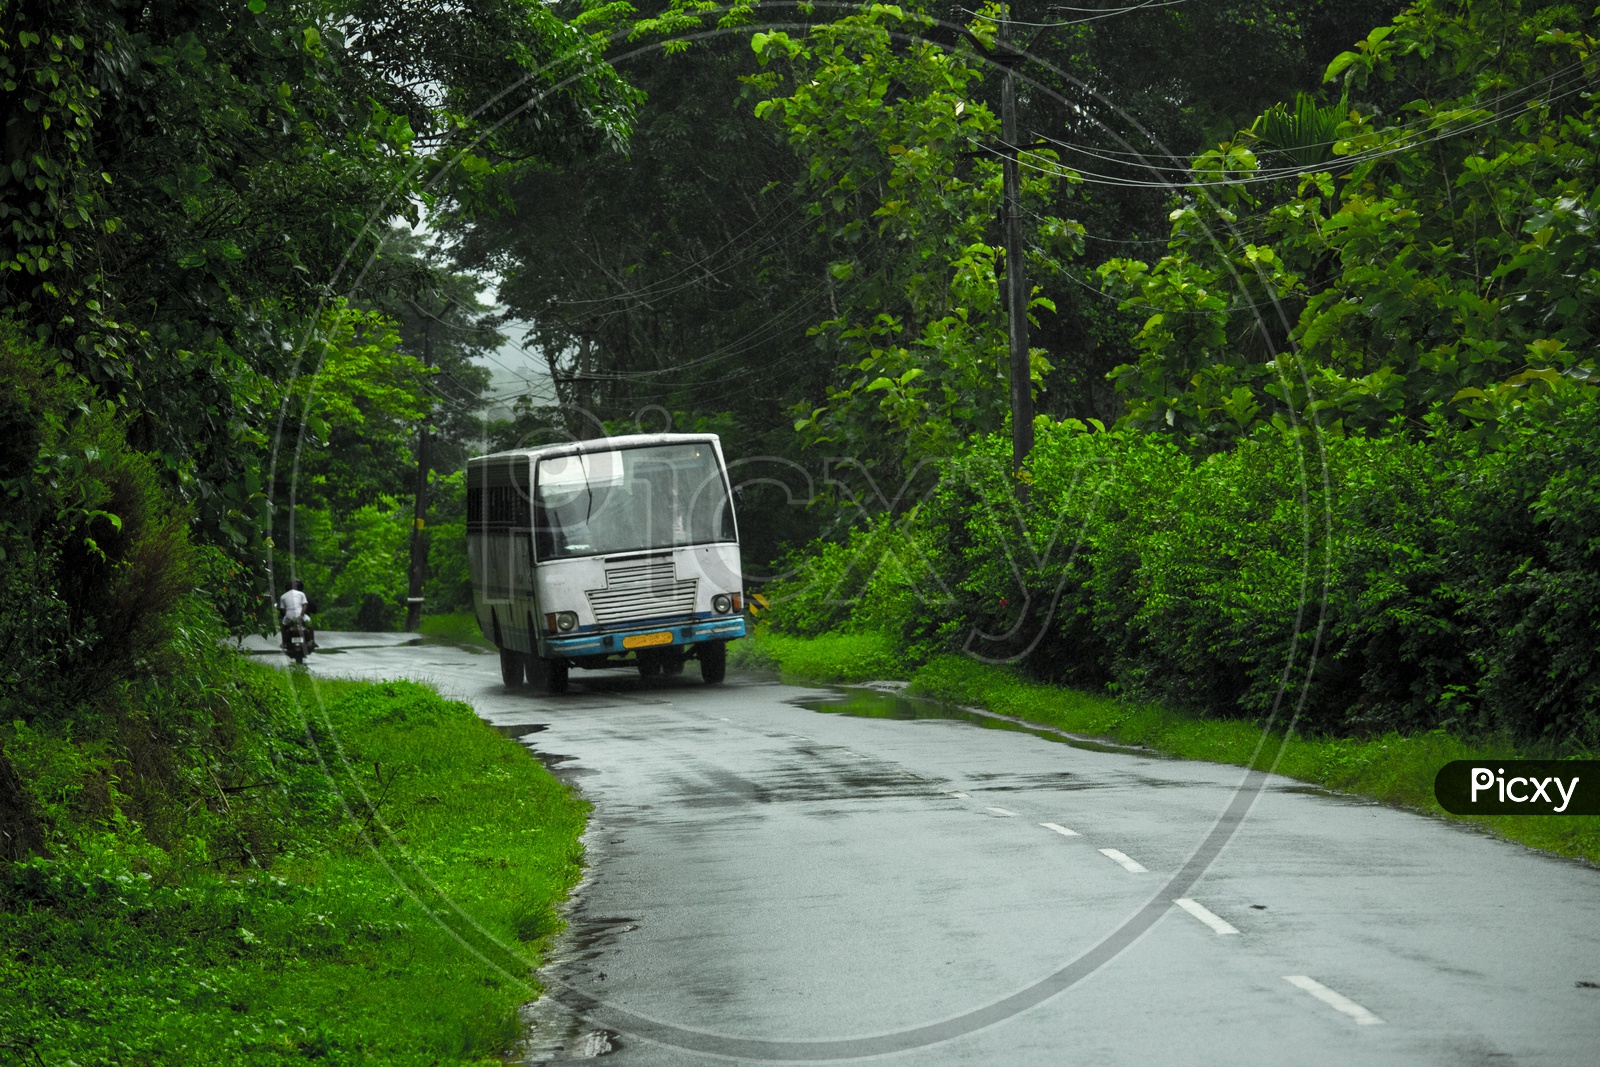 The beautiful Green Paths of the road trips to Wayanad, Kerala